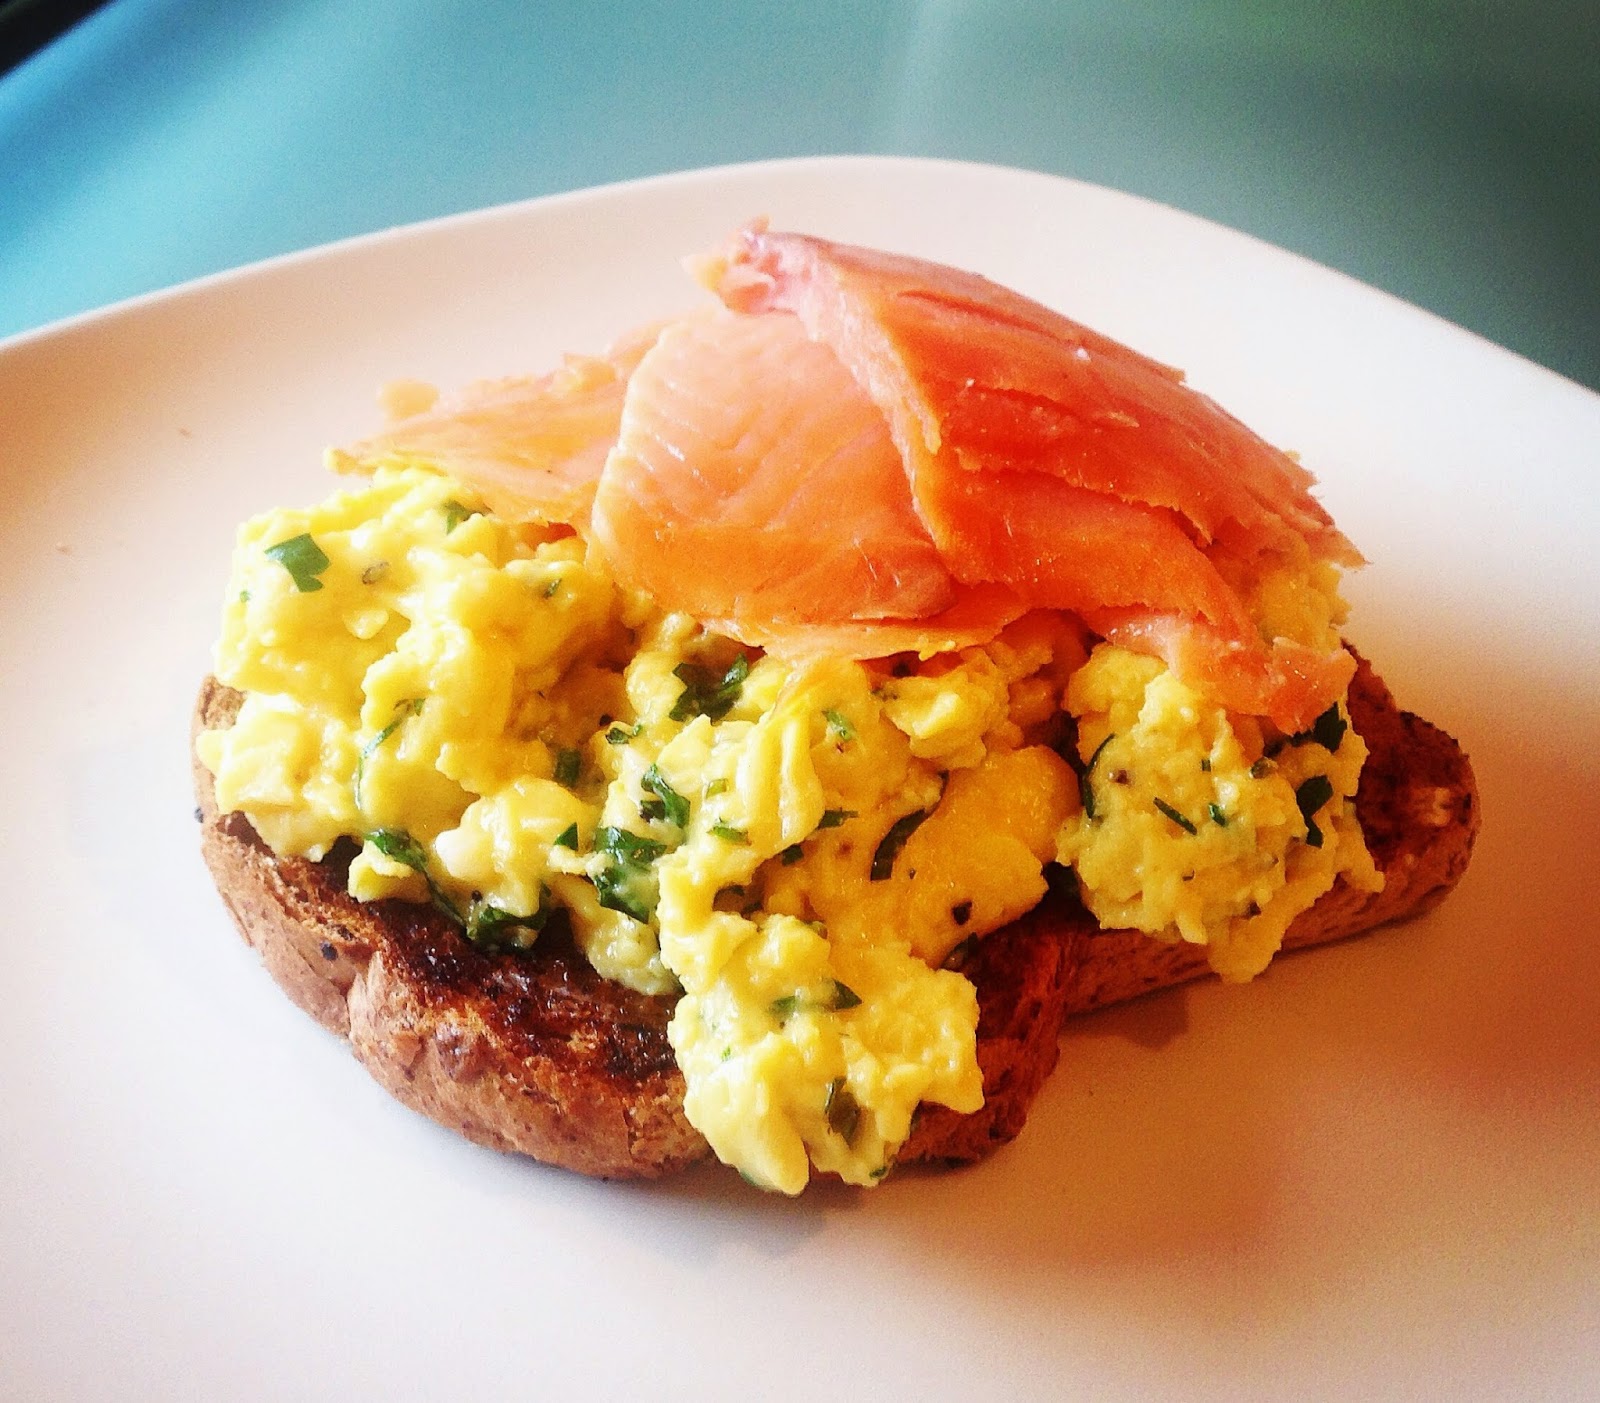 Herby Scrambled Eggs with Smoked Salmon